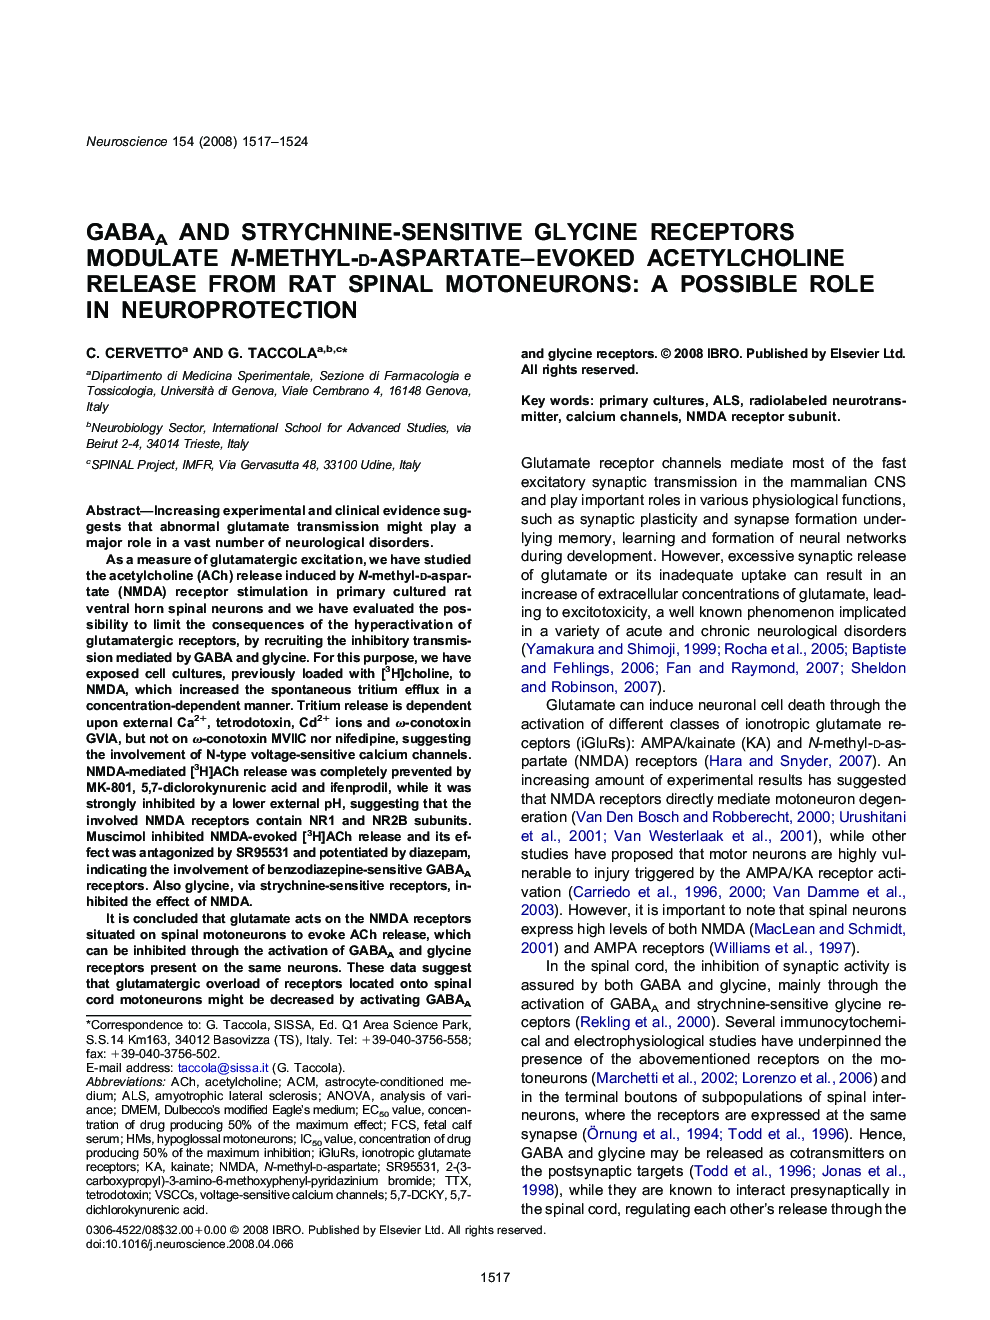 GABAA and strychnine-sensitive glycine receptors modulate N-methyl-d-aspartate-evoked acetylcholine release from rat spinal motoneurons: A possible role in neuroprotection